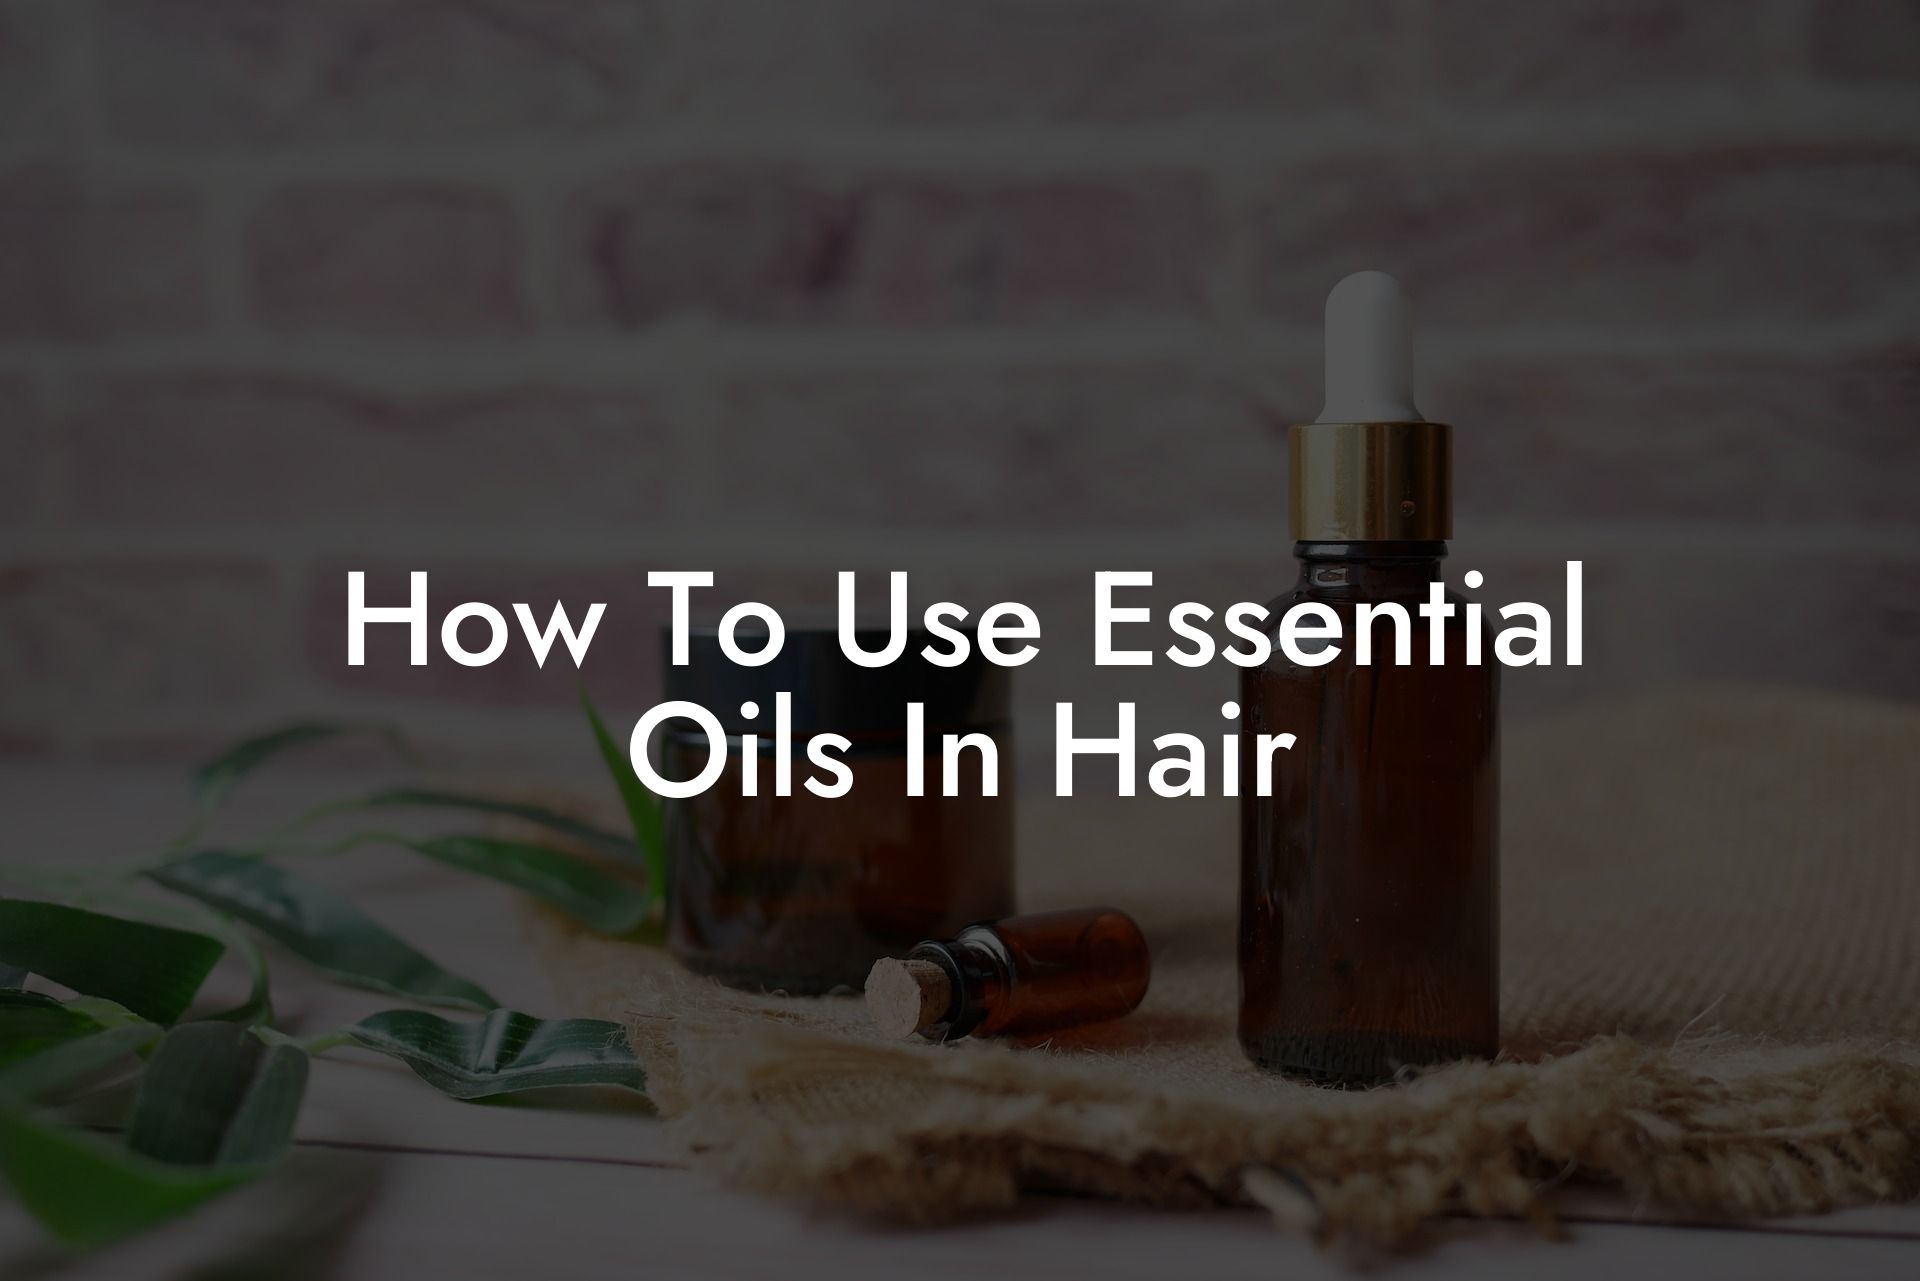 How To Use Essential Oils In Hair